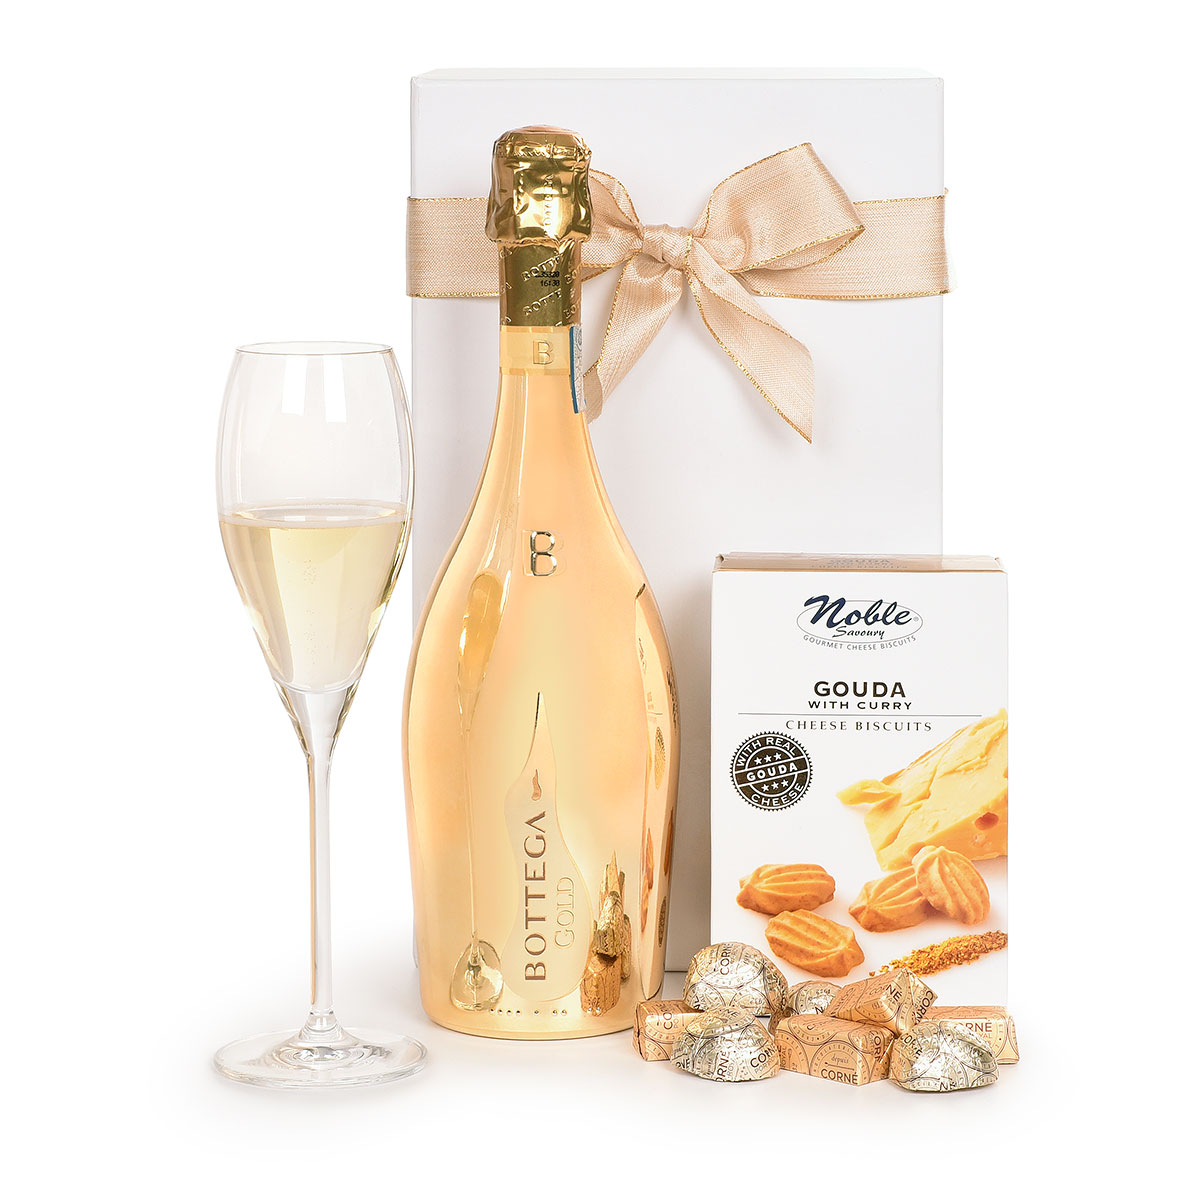 Bottega Gold Prosecco Spumante Snacks Chocolates Delivery In Belgium By Giftsforeurope